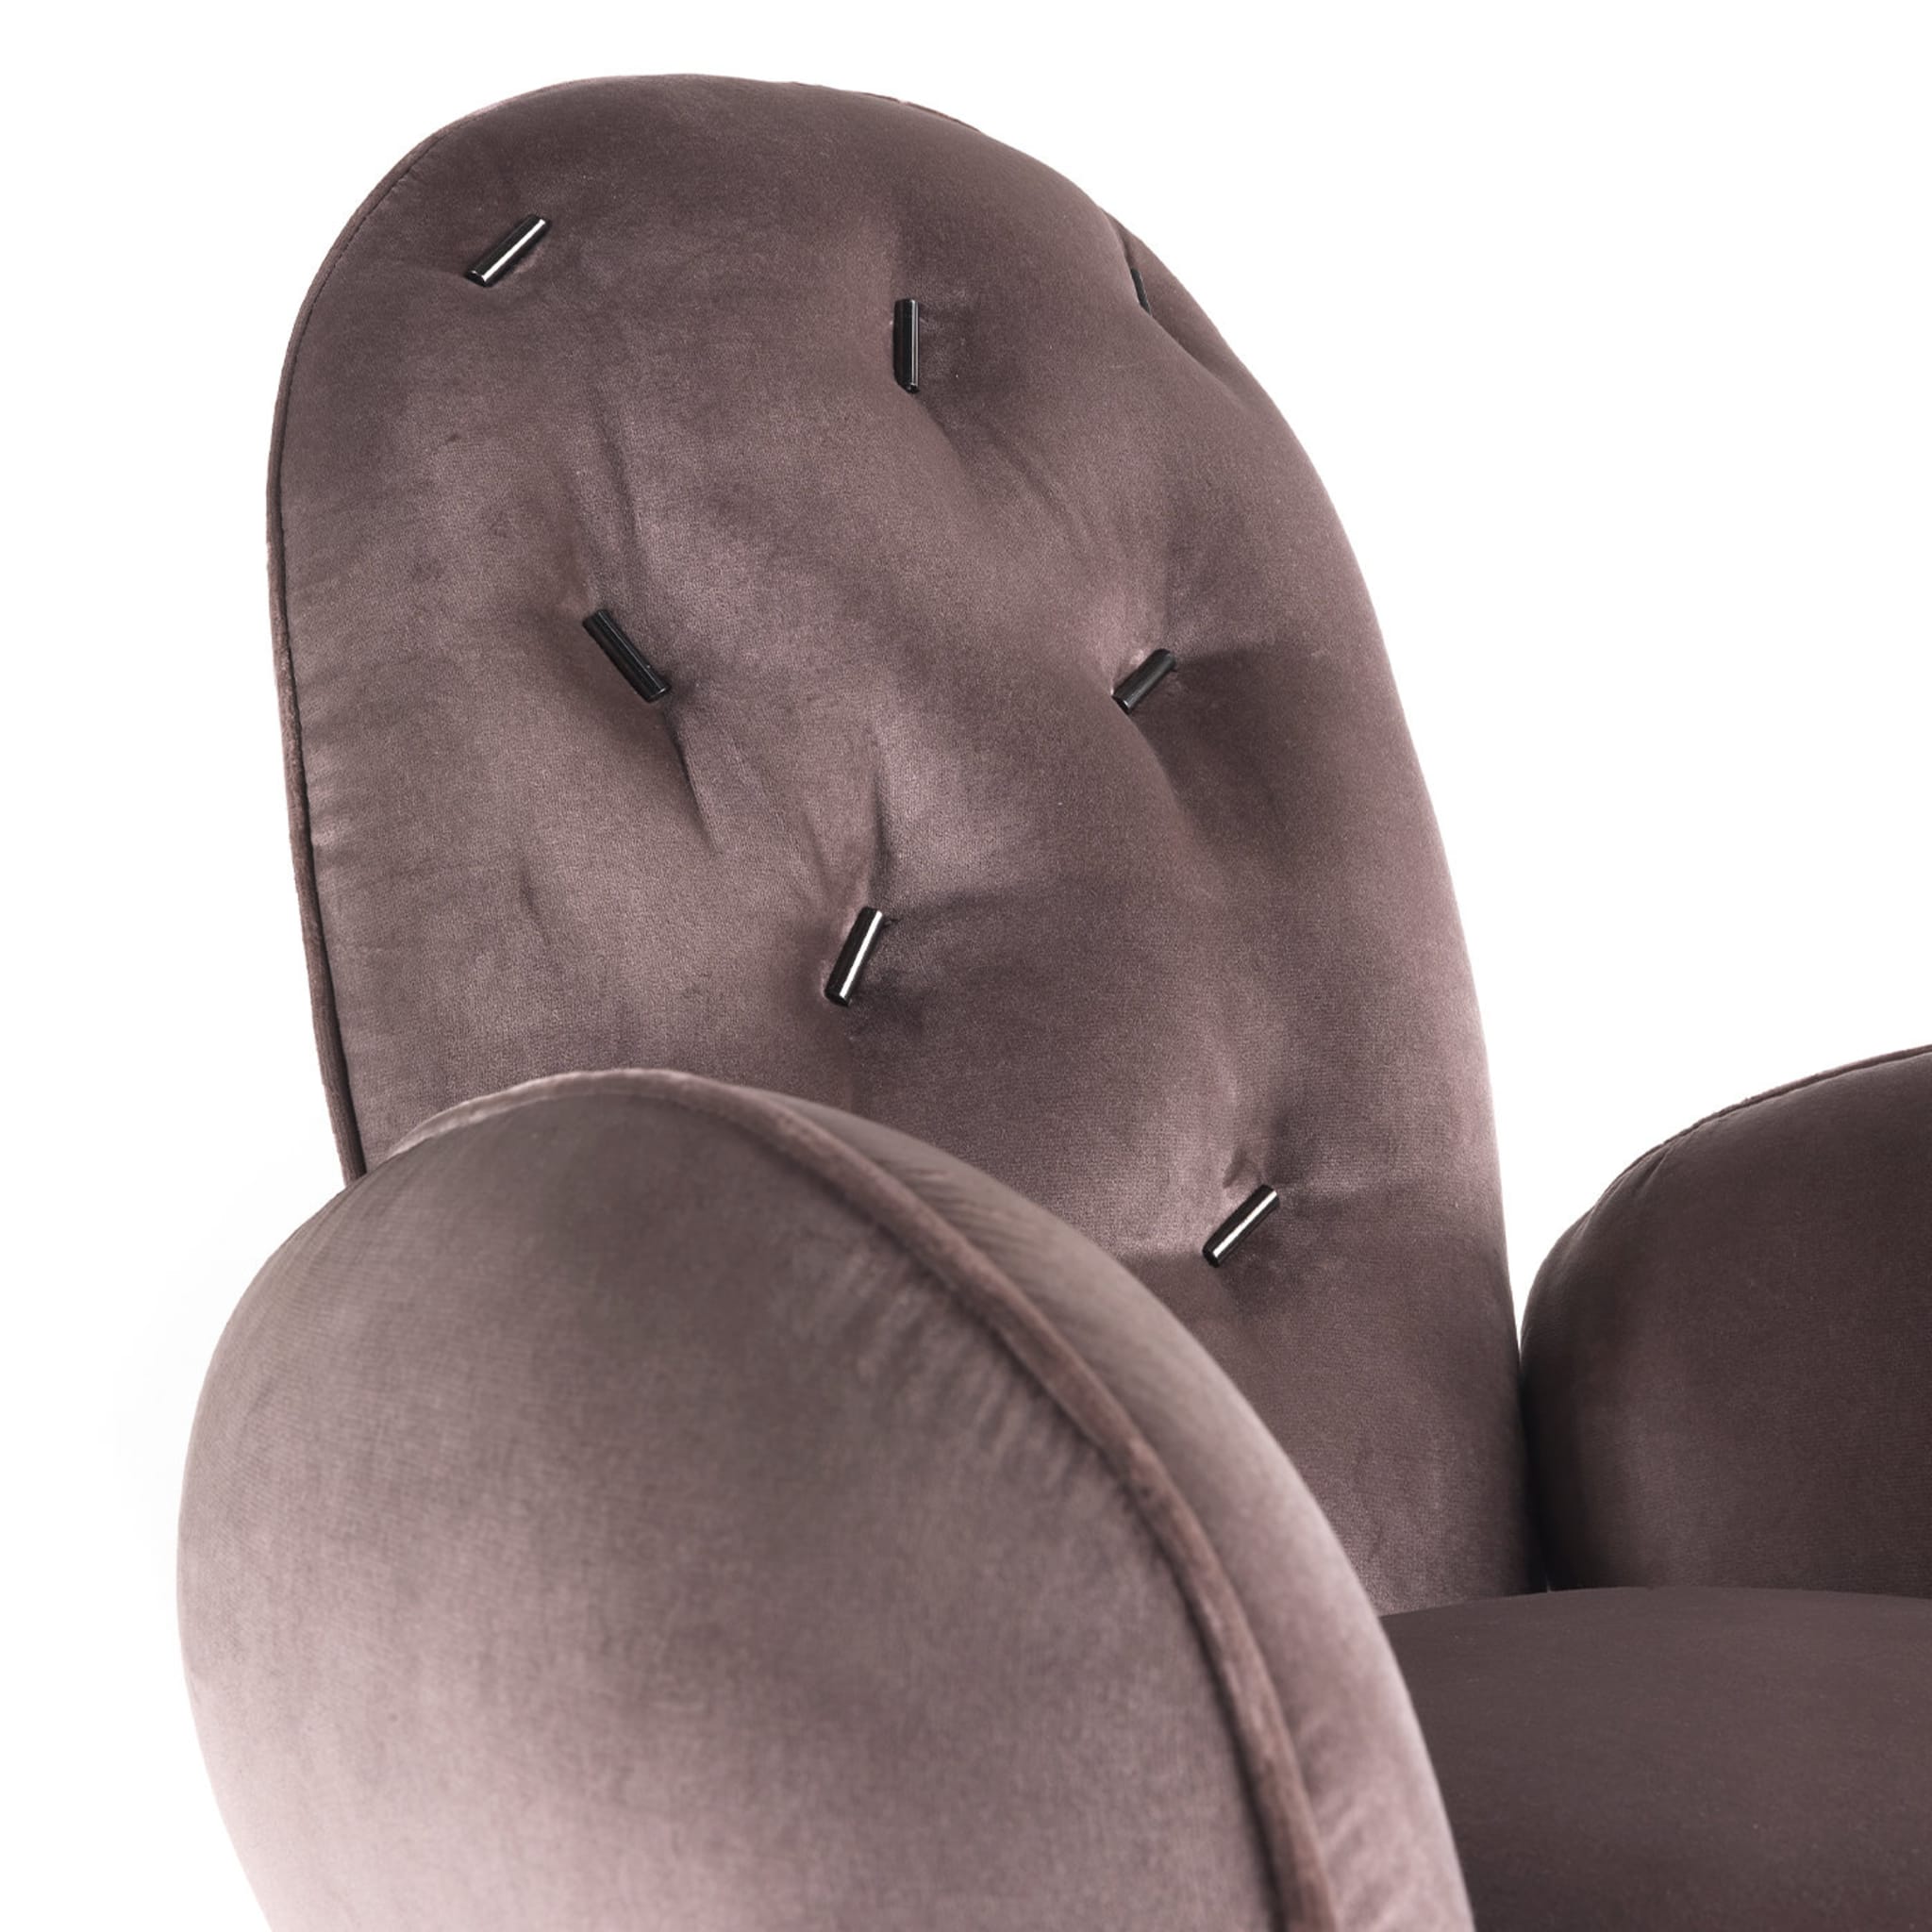 Ttemic Lilac Chair with Arms by Matteo Cibic - Alternative view 1